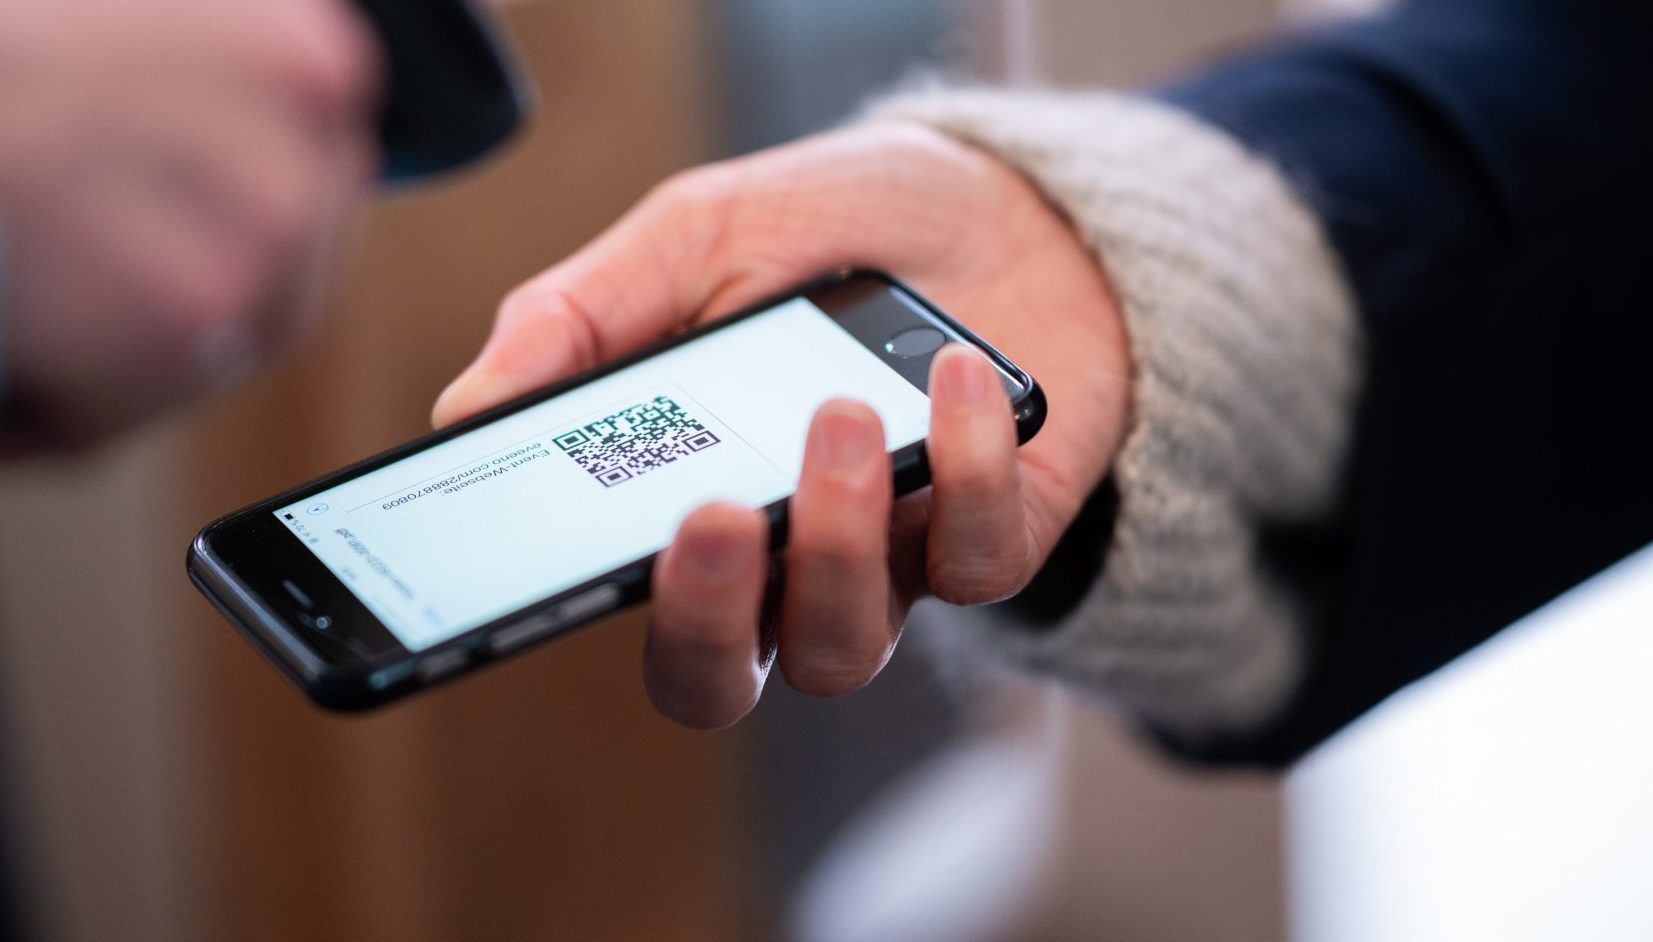 A woman has a QR code scanned on her smartphone in Germany in April 2021